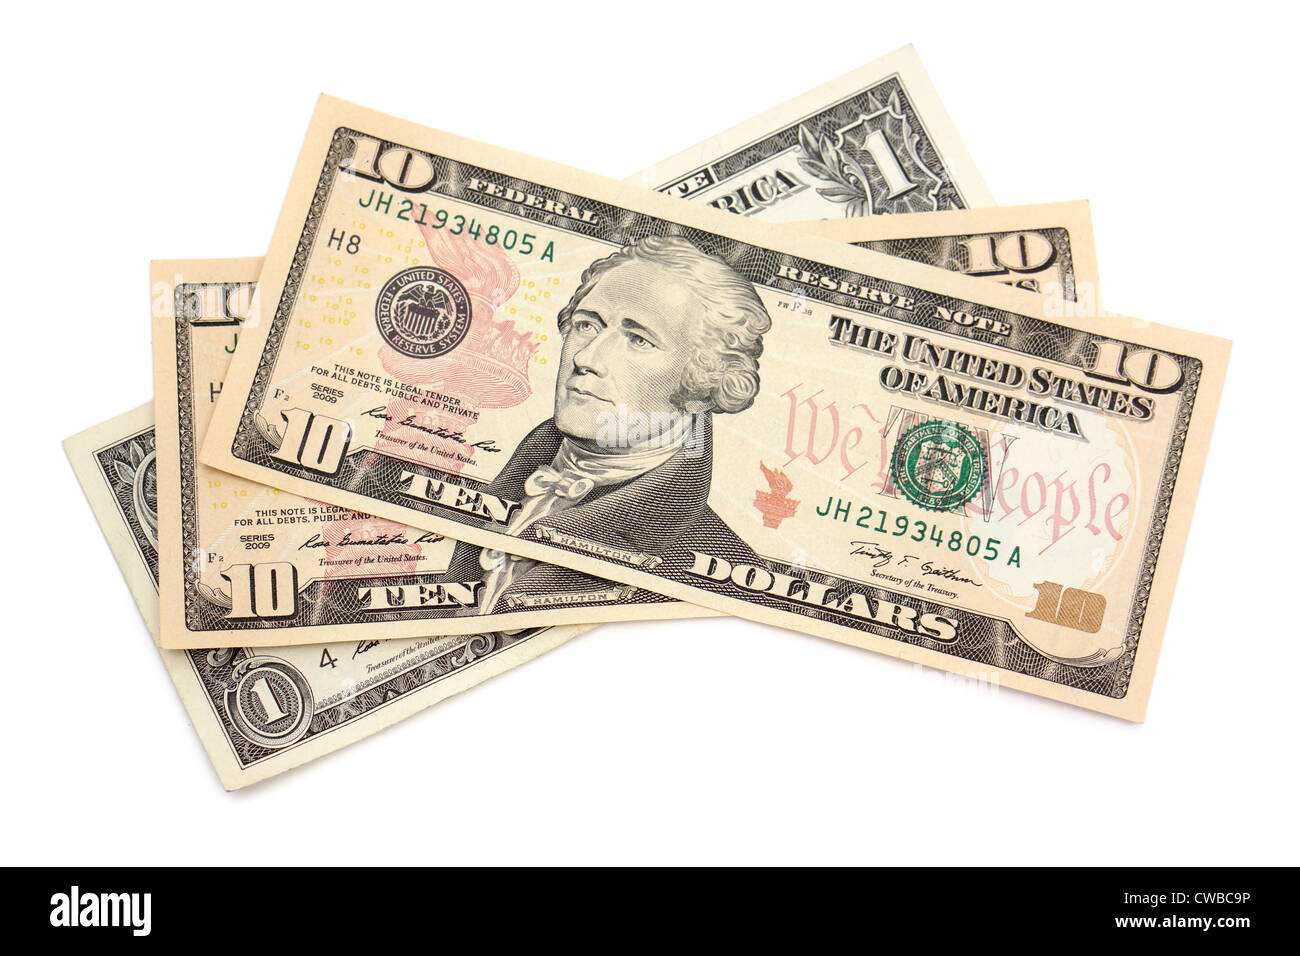 Dollar Bills, US Currency, Bank Notes Stock Photo